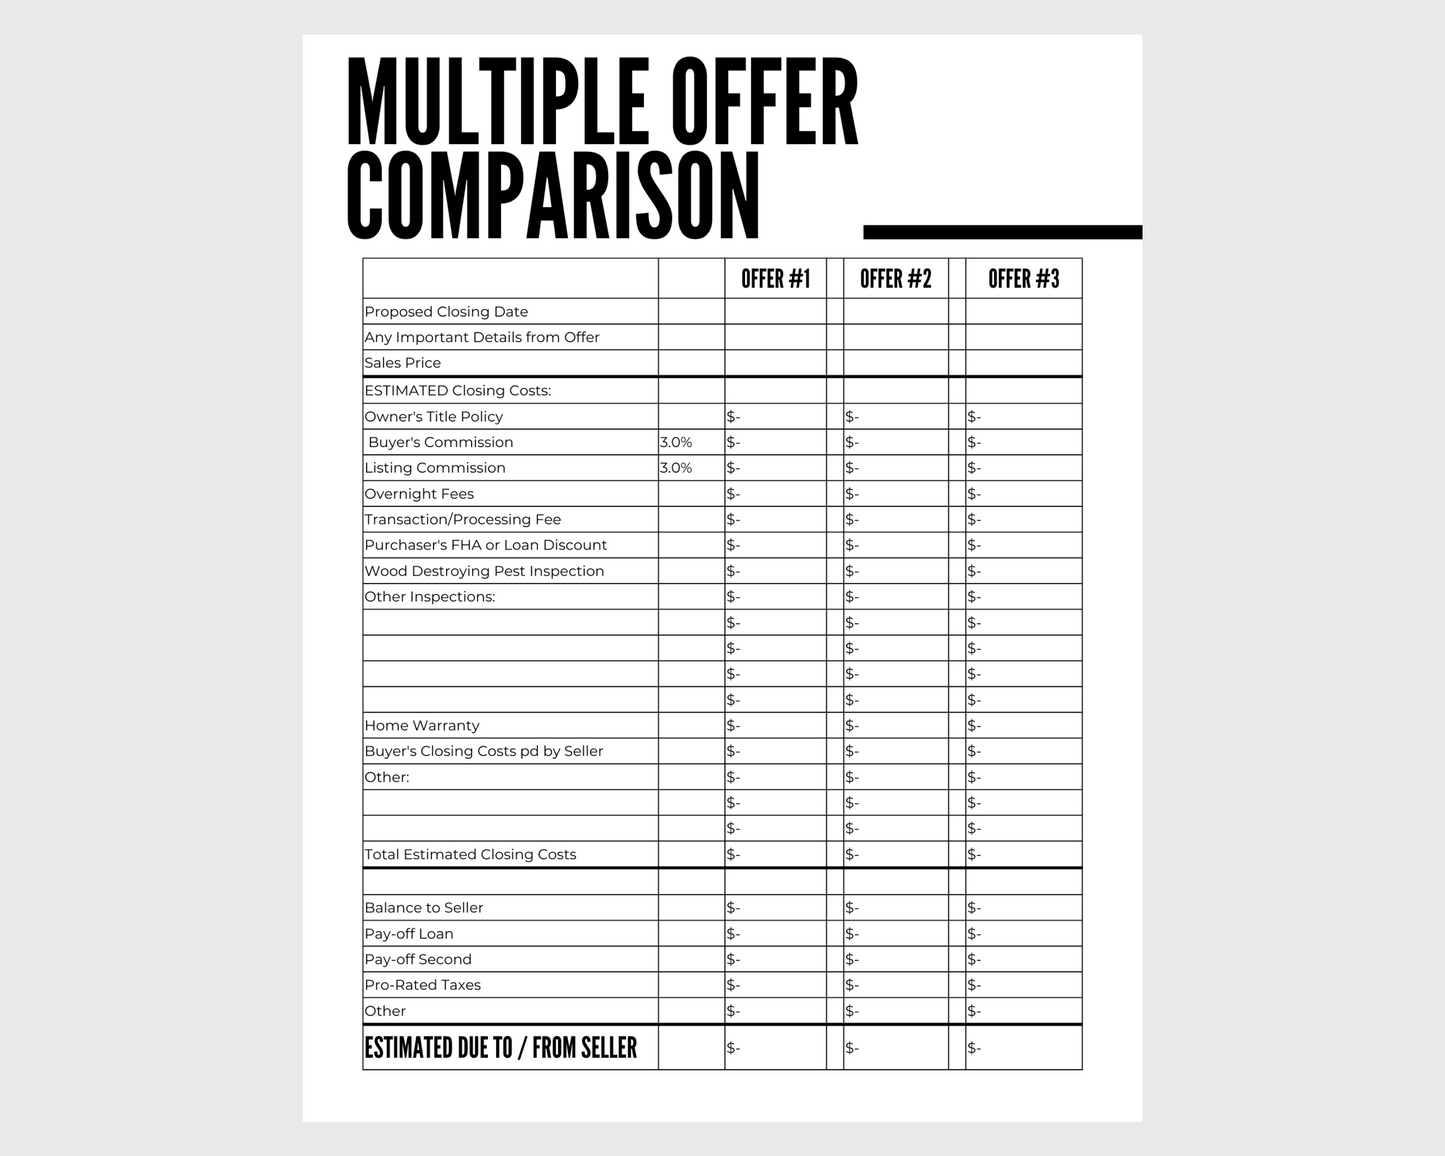 Compare Offers Side by Side